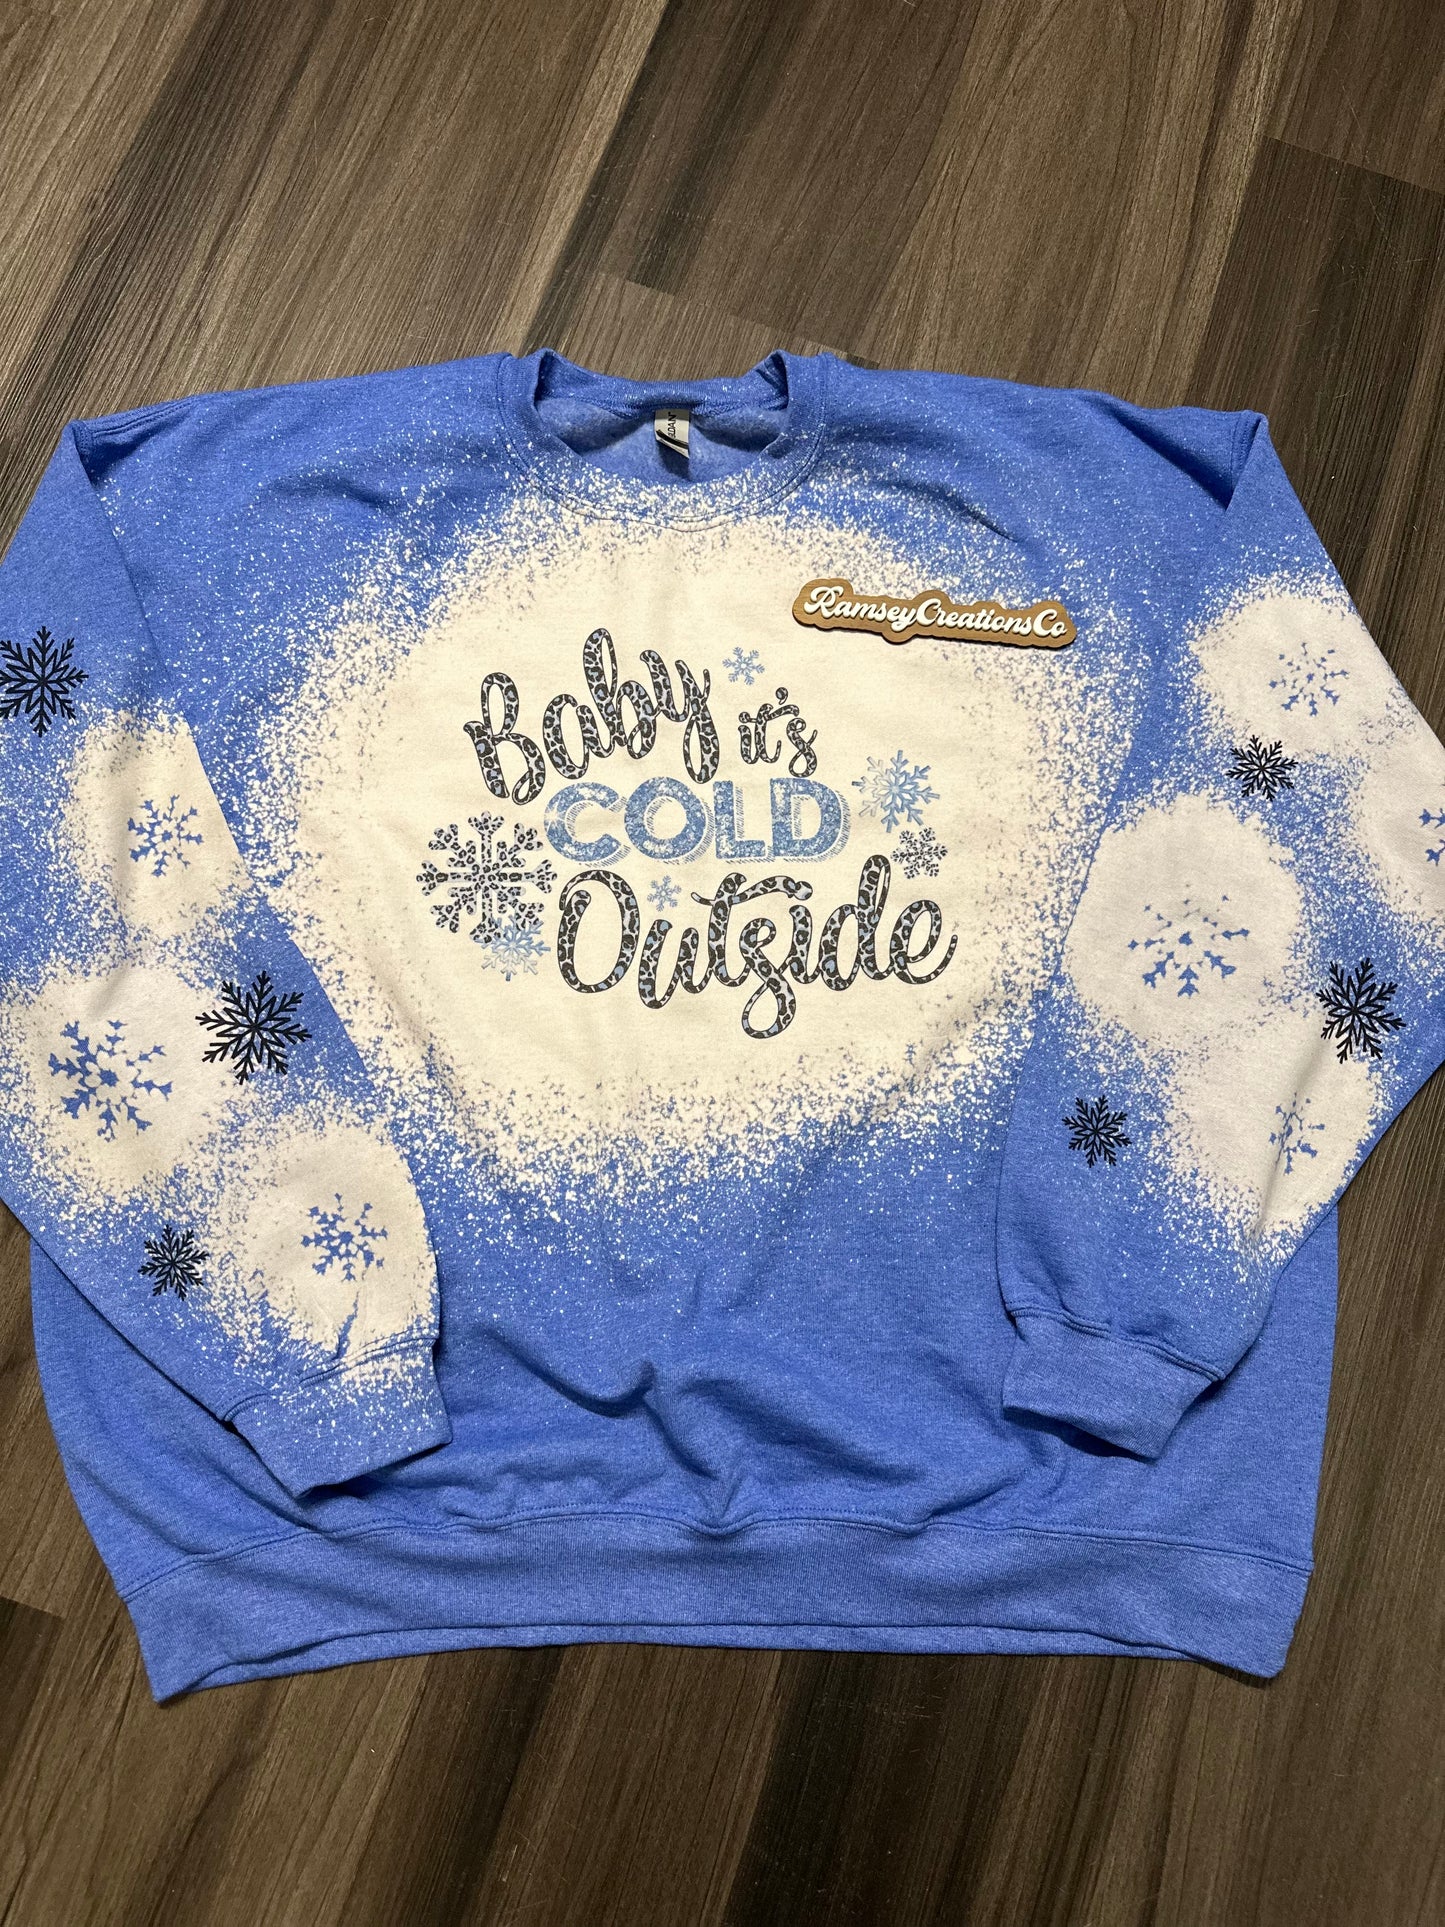 Baby It’s Cold Outside Crewneck!